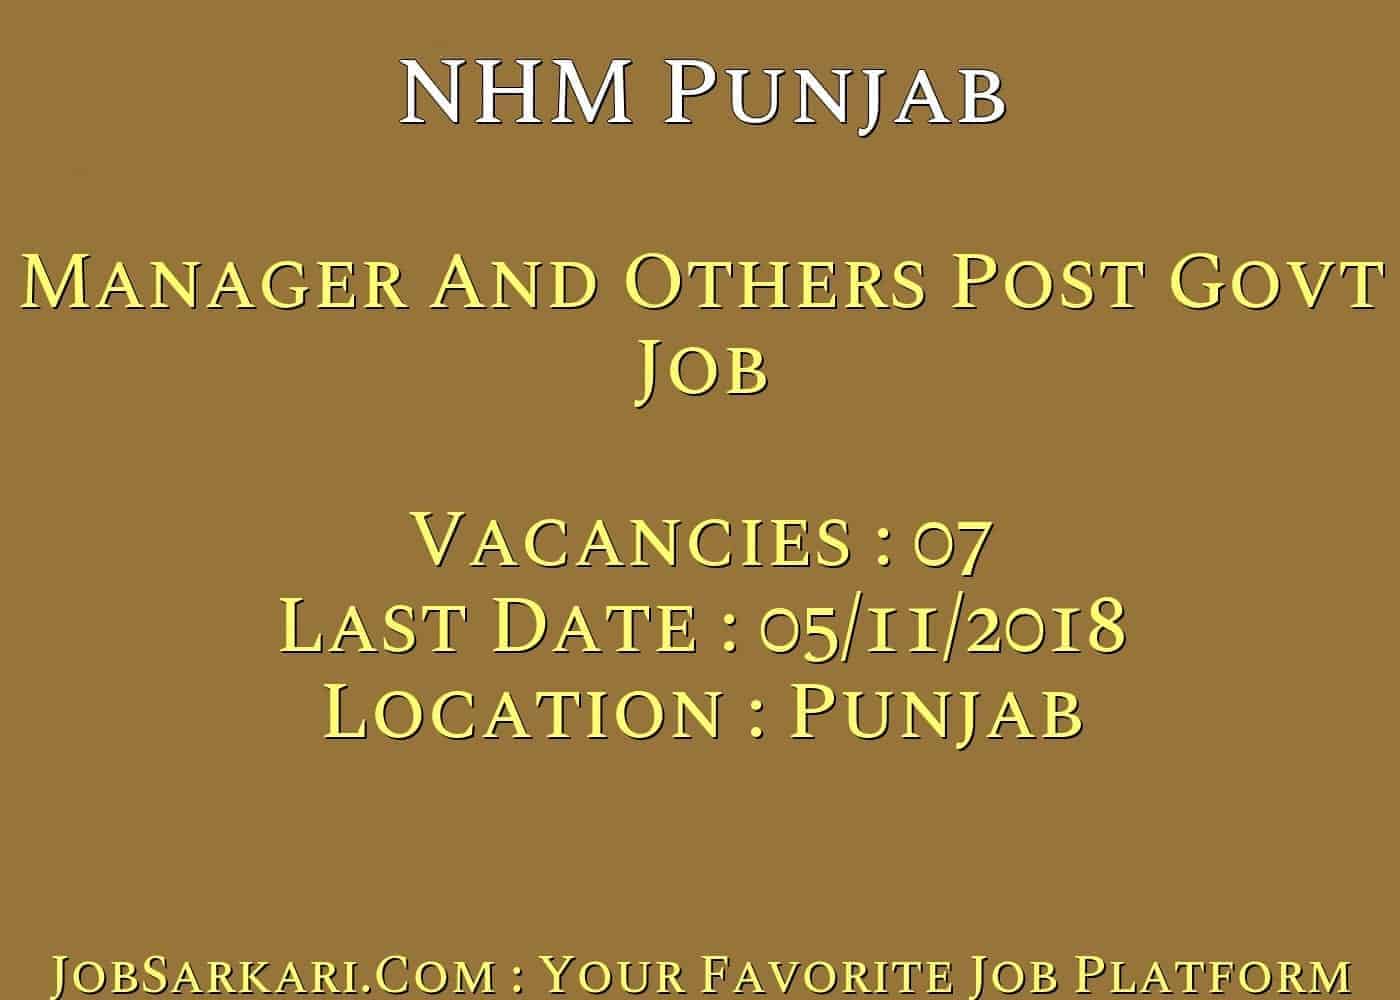 NHM Punjab Recruitment 2018 For Manager And Others Post Govt Job